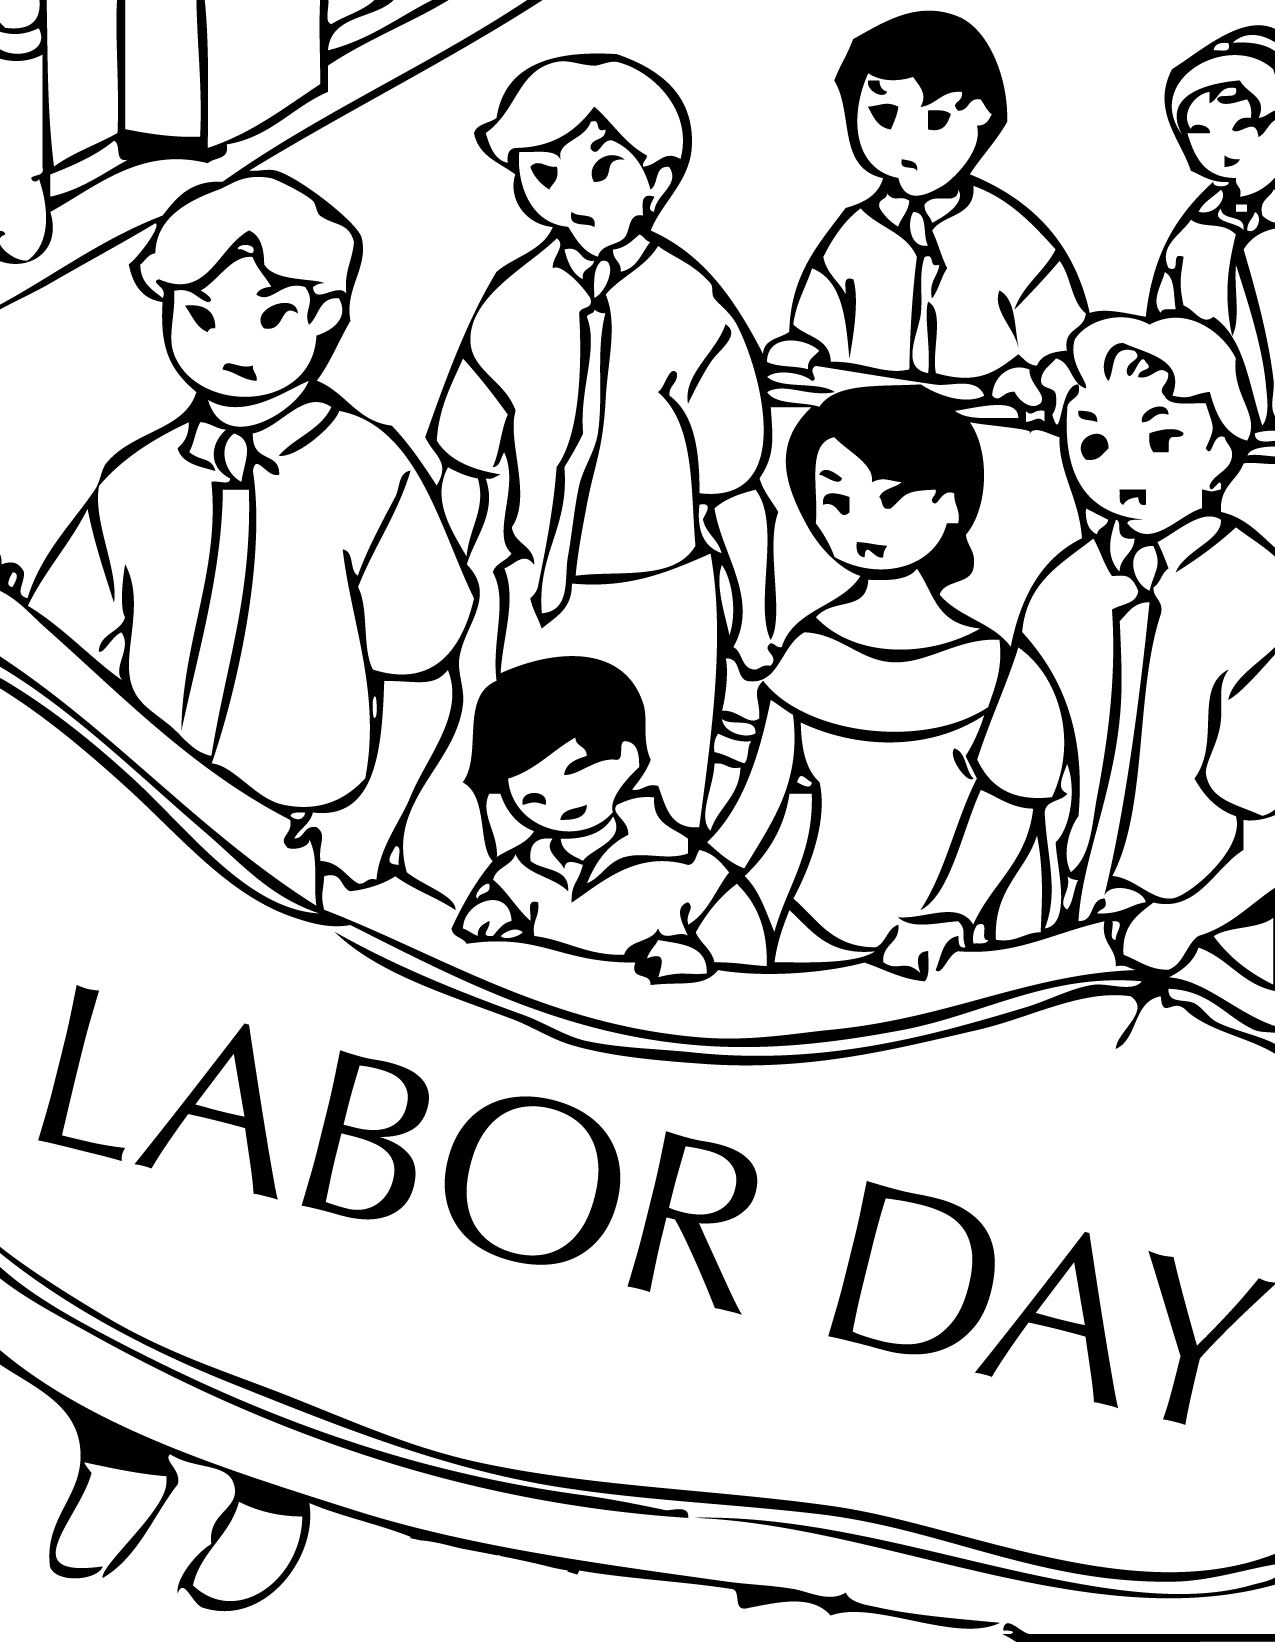 labor-day-coloring-pages-best-coloring-pages-for-kids